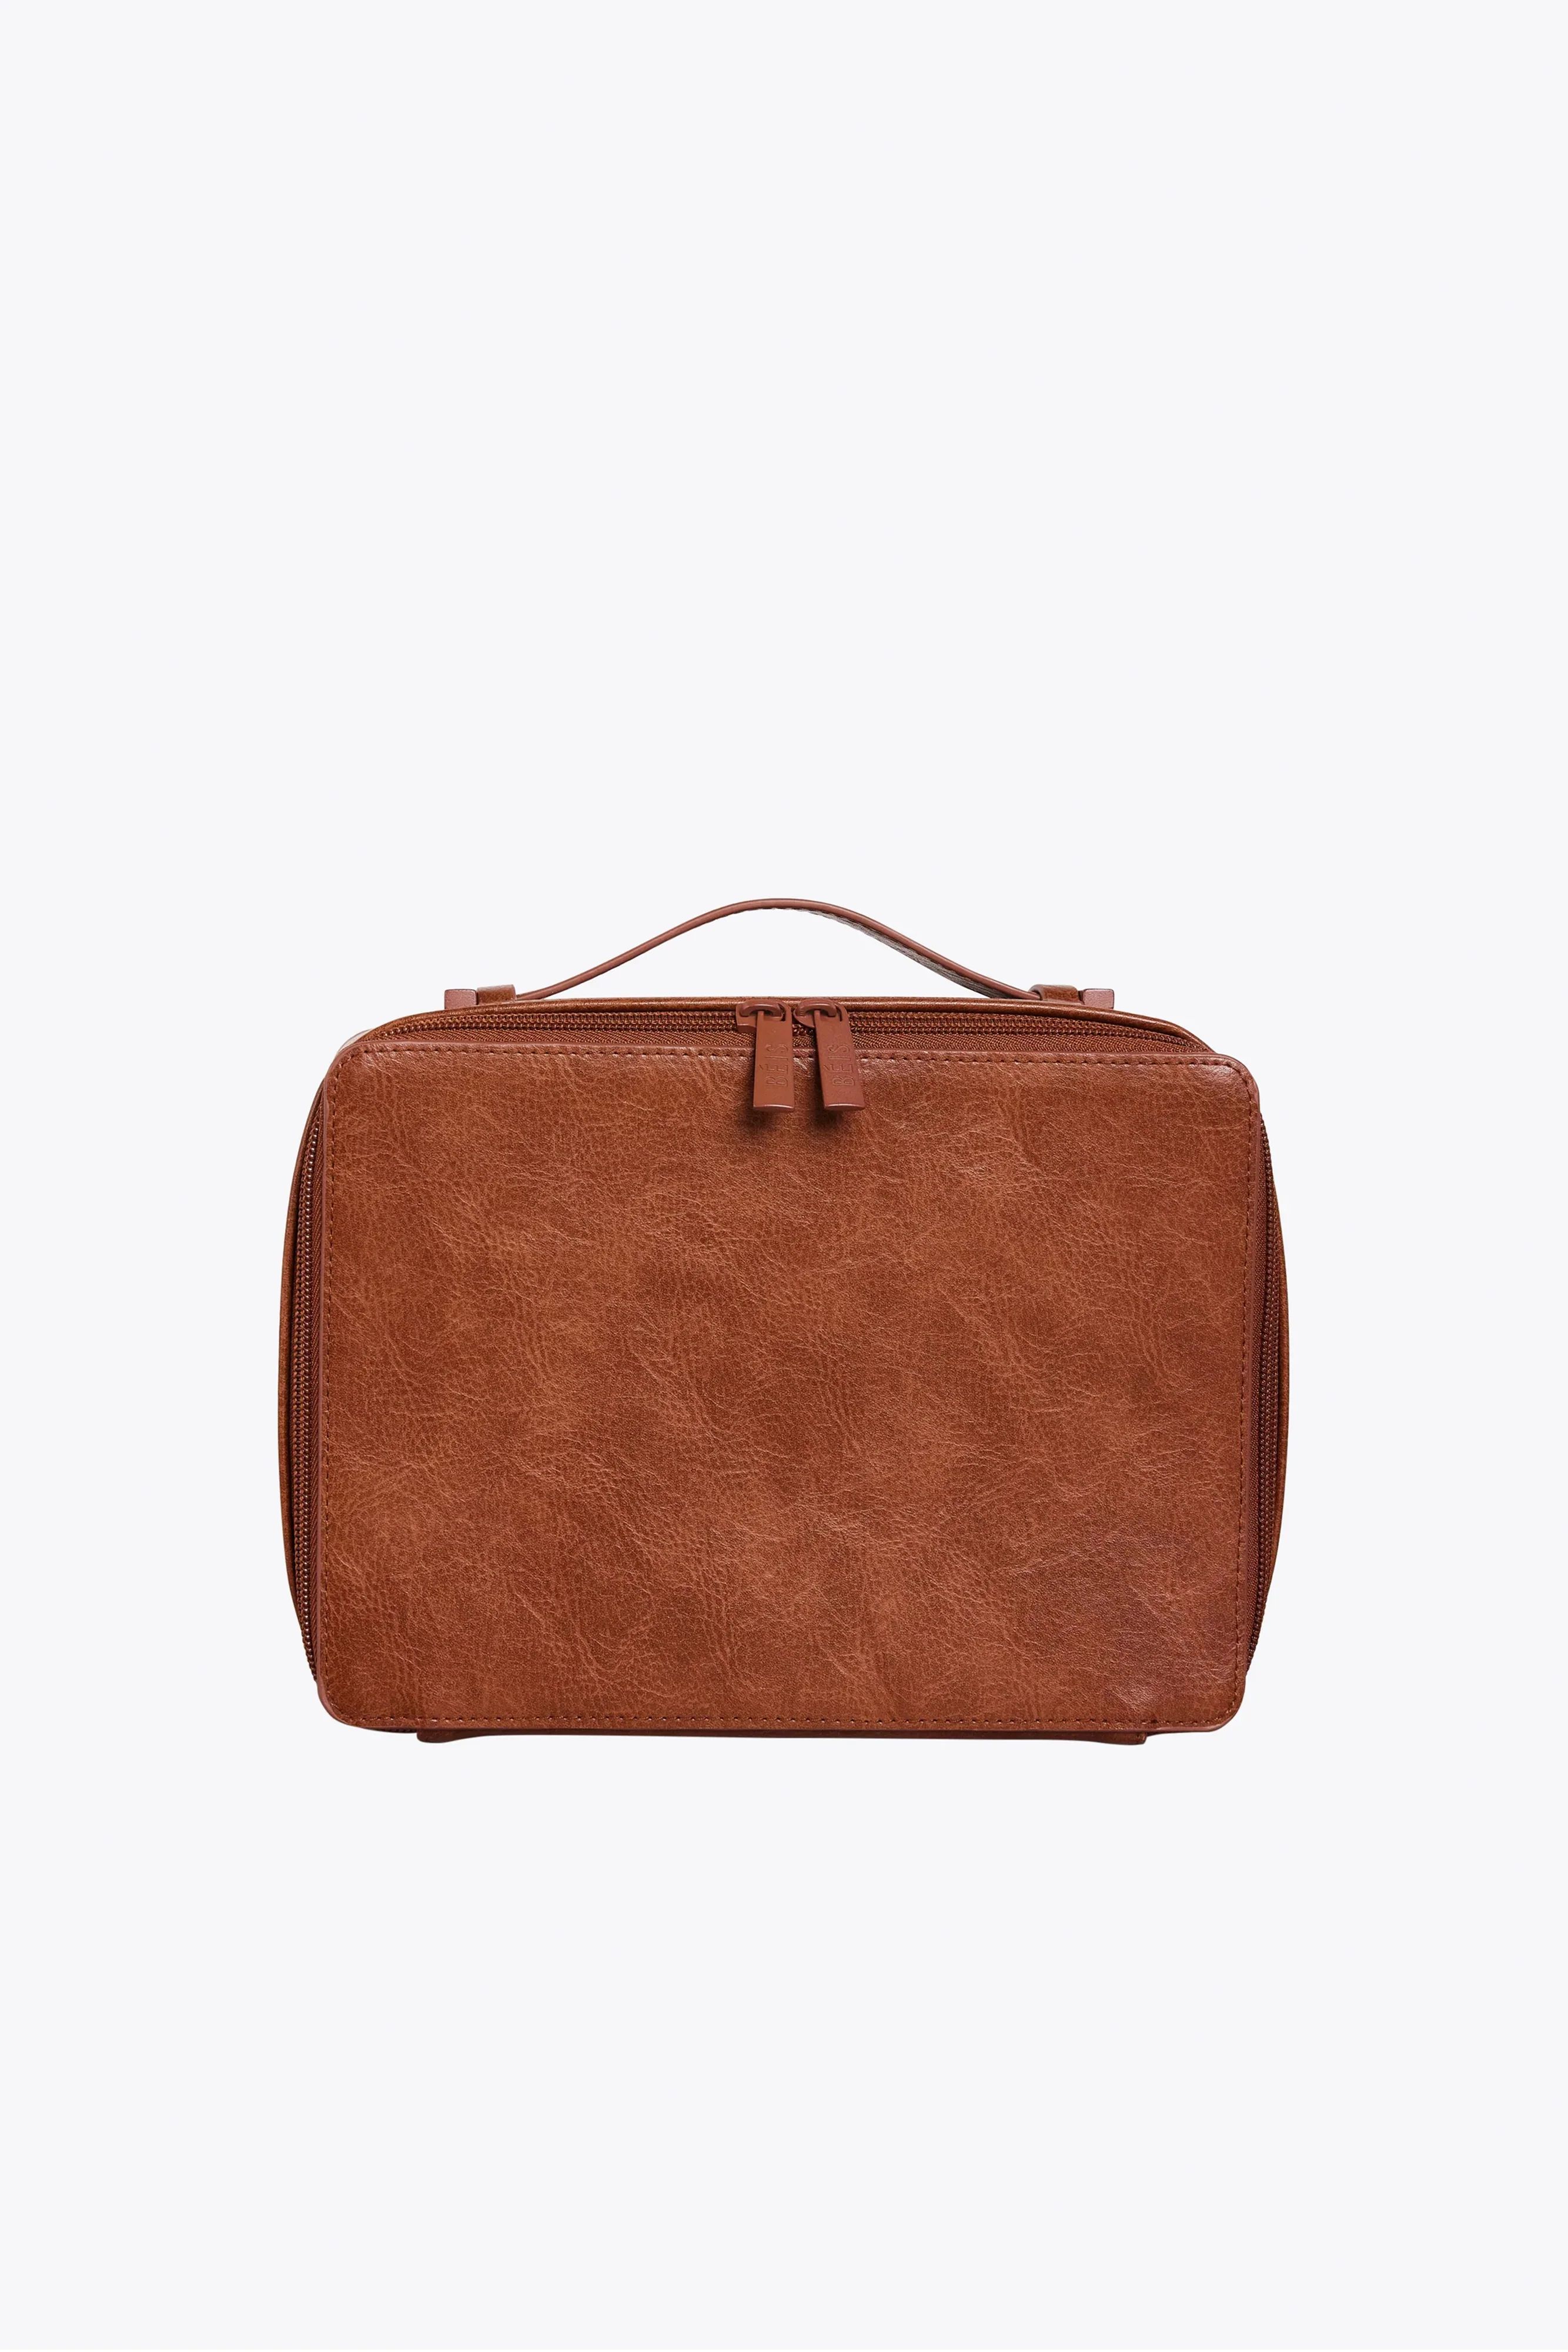 The Cosmetic Case in Maple | BÉIS Travel